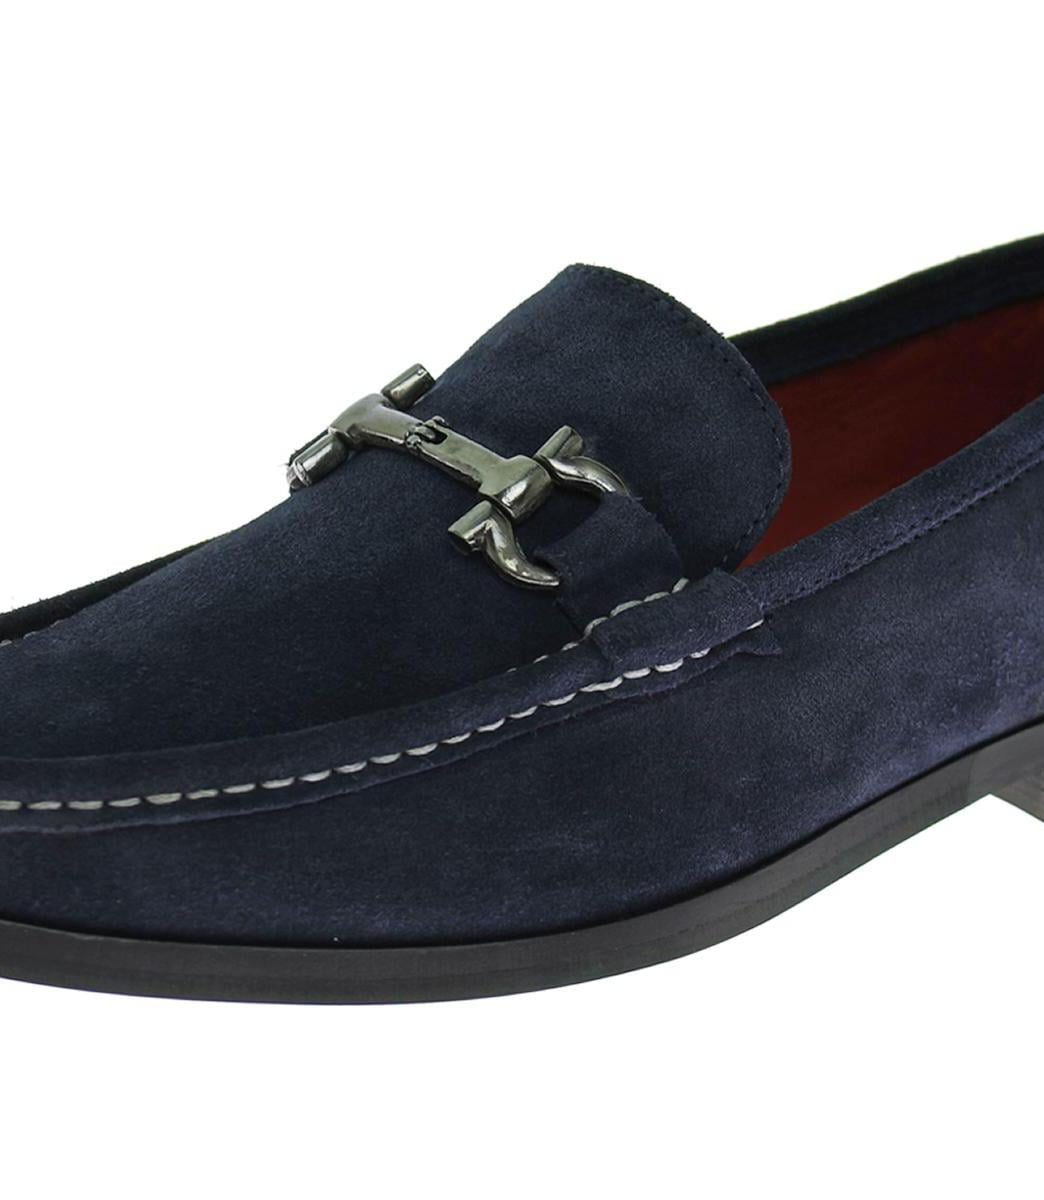 Mens Lucca Suede Navy Leather Comfort Shoes Luciano Natazzi - Walmart.com